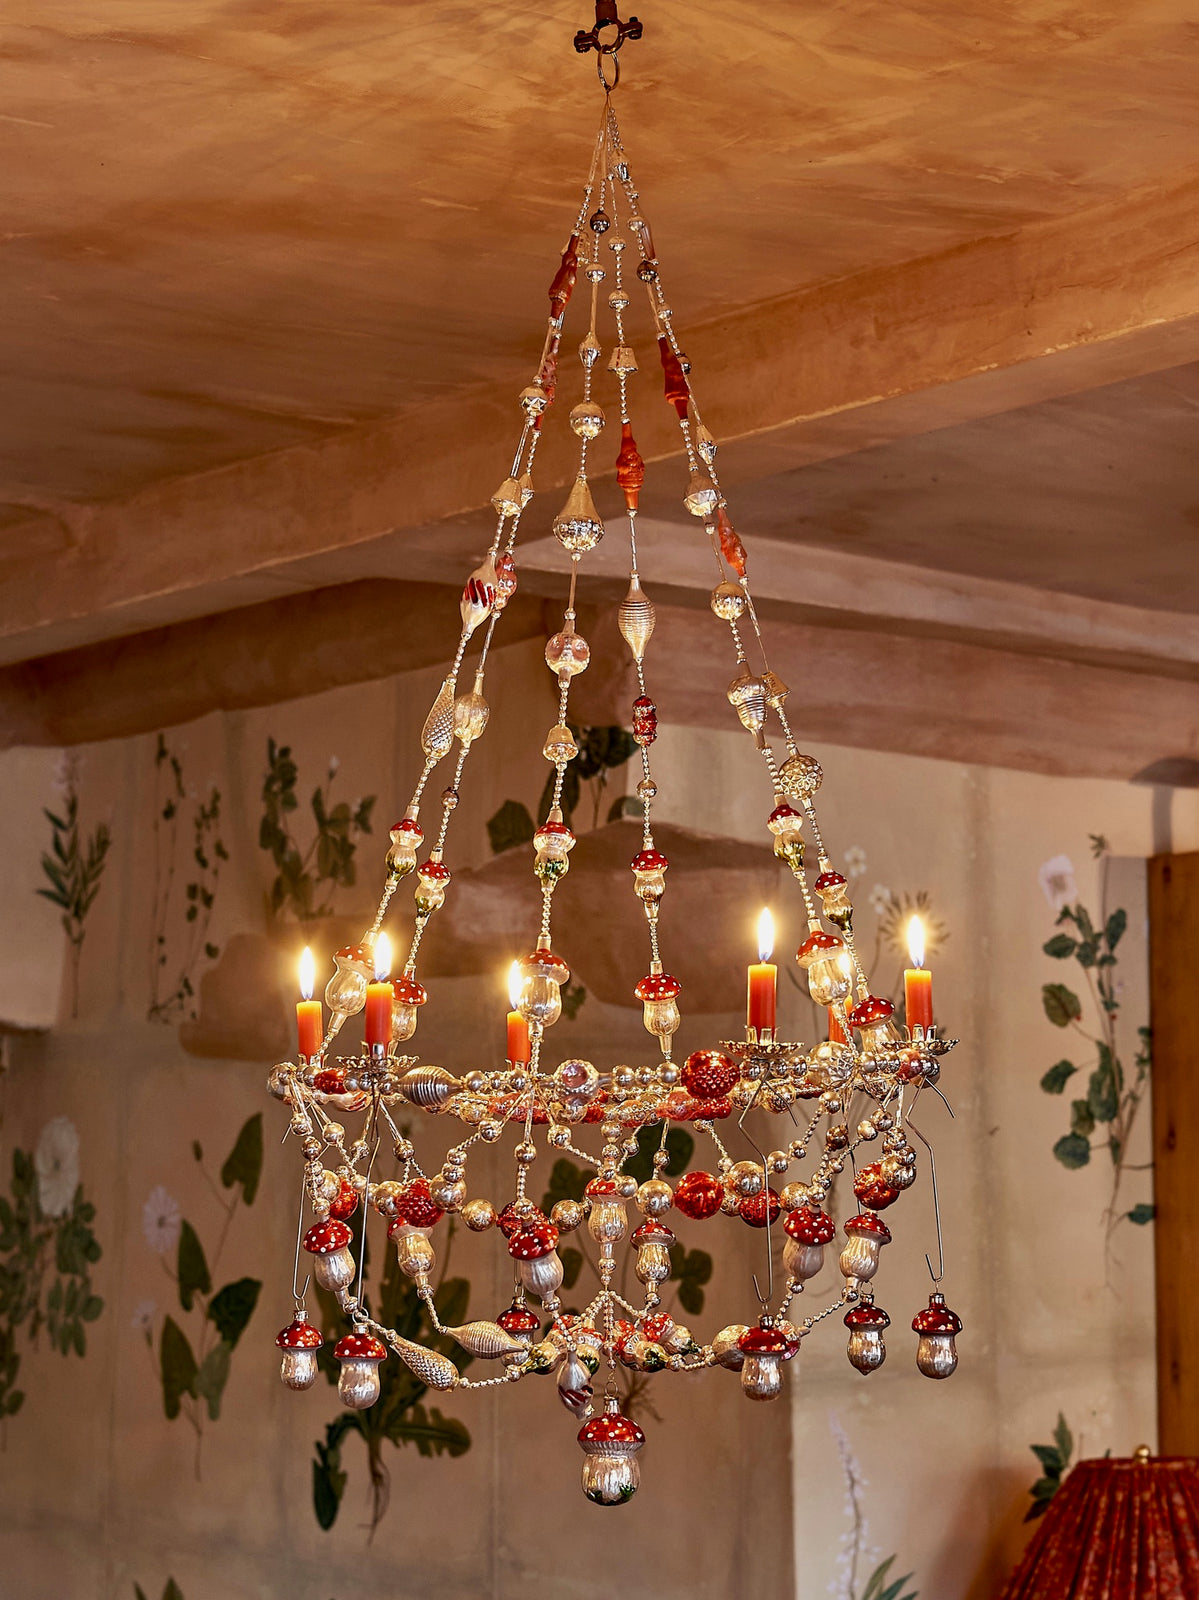 Mushroom Chandelier Made from Glass Ornaments with Candle Holders